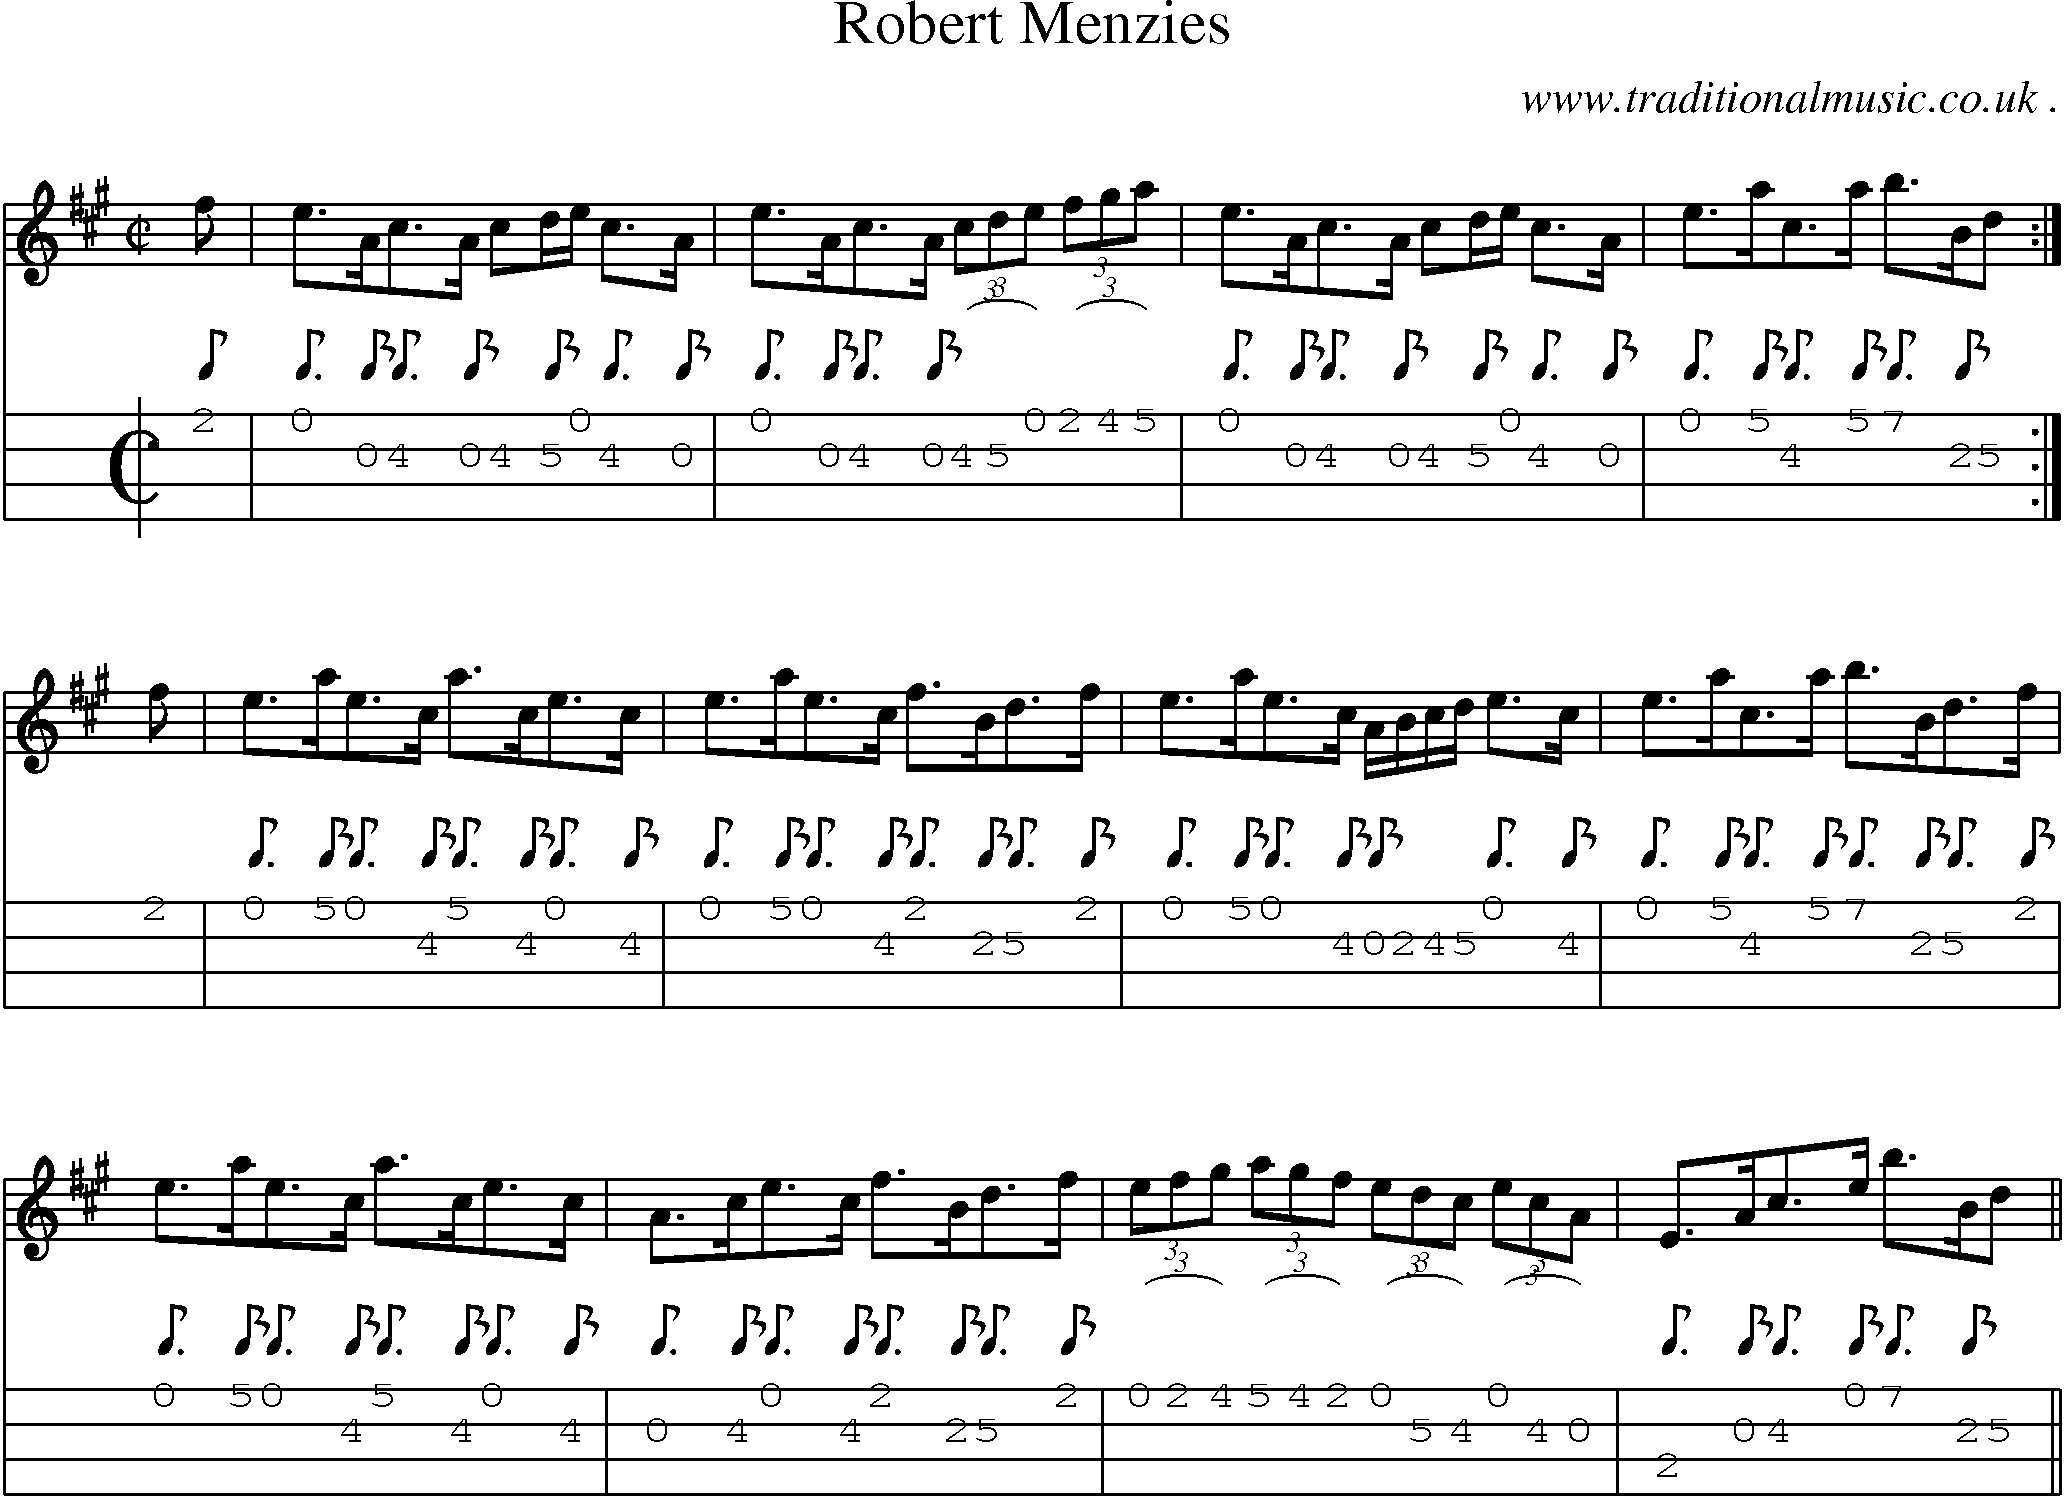 Sheet-music  score, Chords and Mandolin Tabs for Robert Menzies